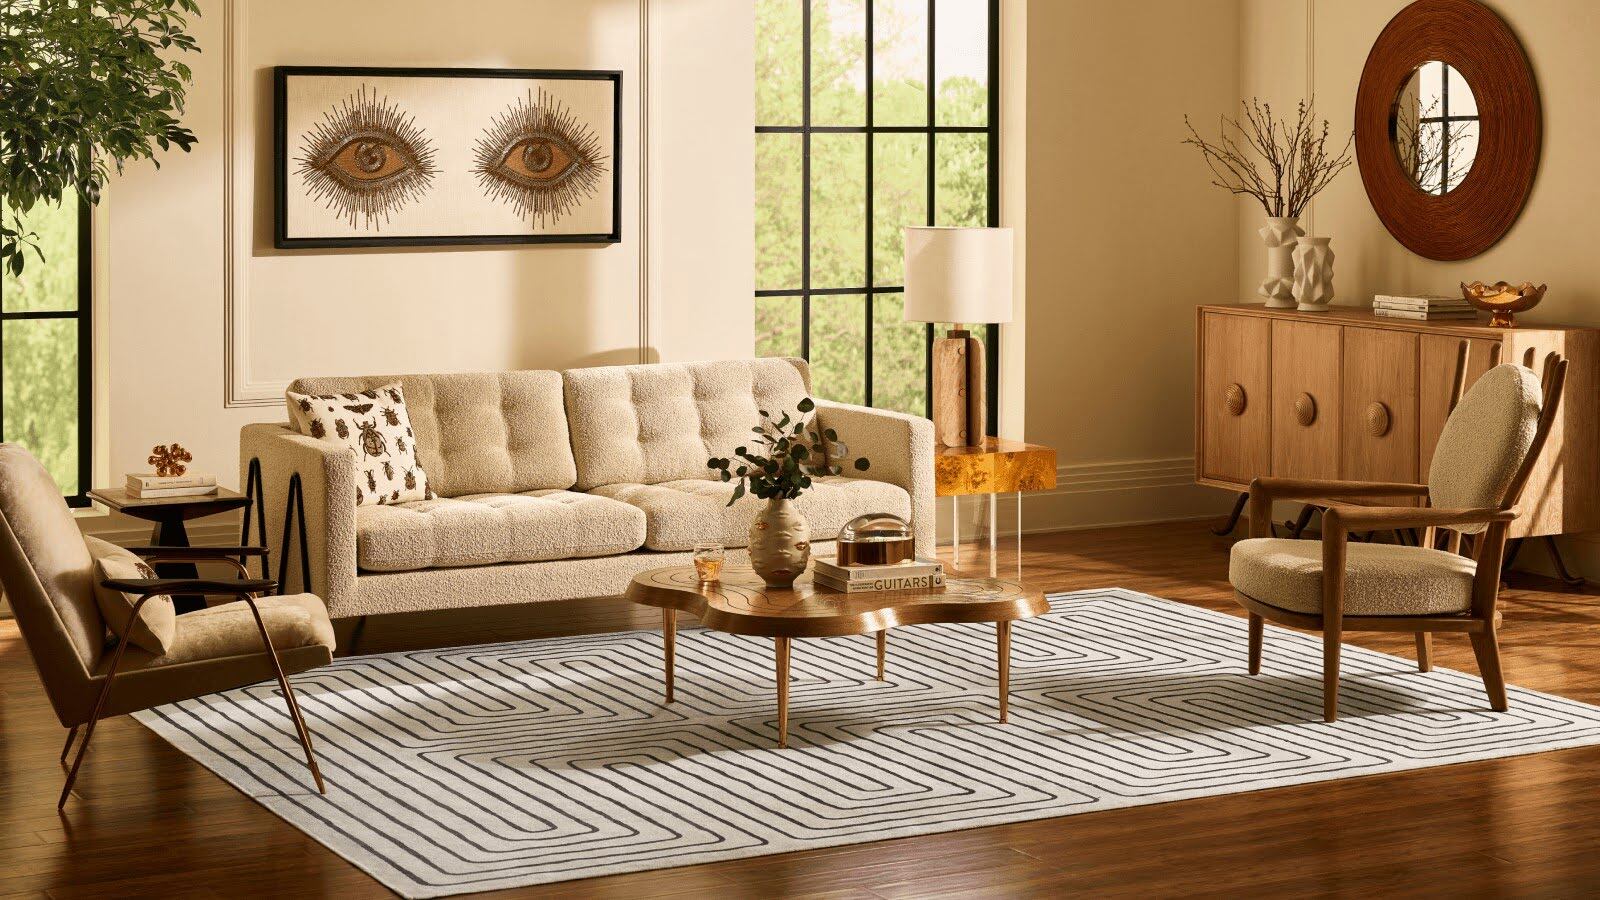 What Size Should A Rug Be In A Living Room